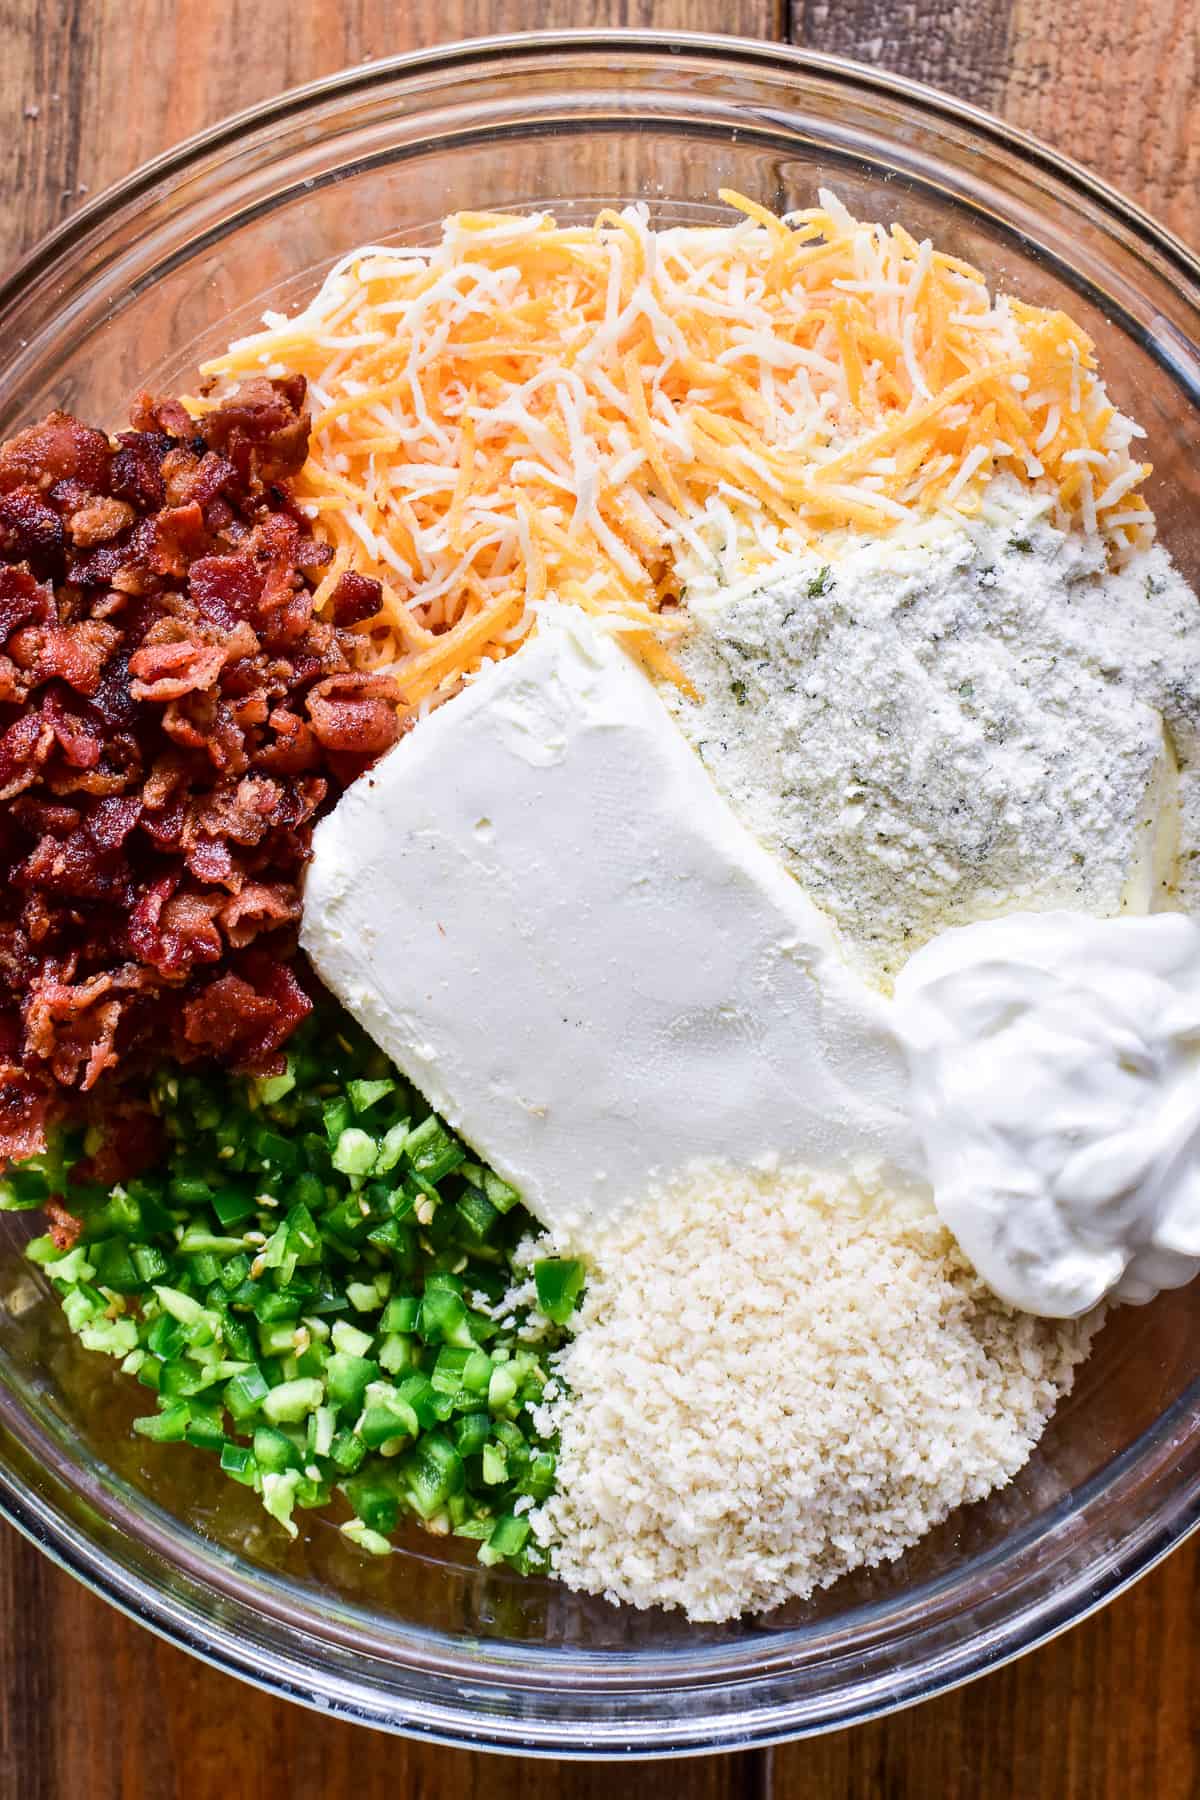 Jalapeño Popper Cheese Ball ingredients in a large mixing bowl